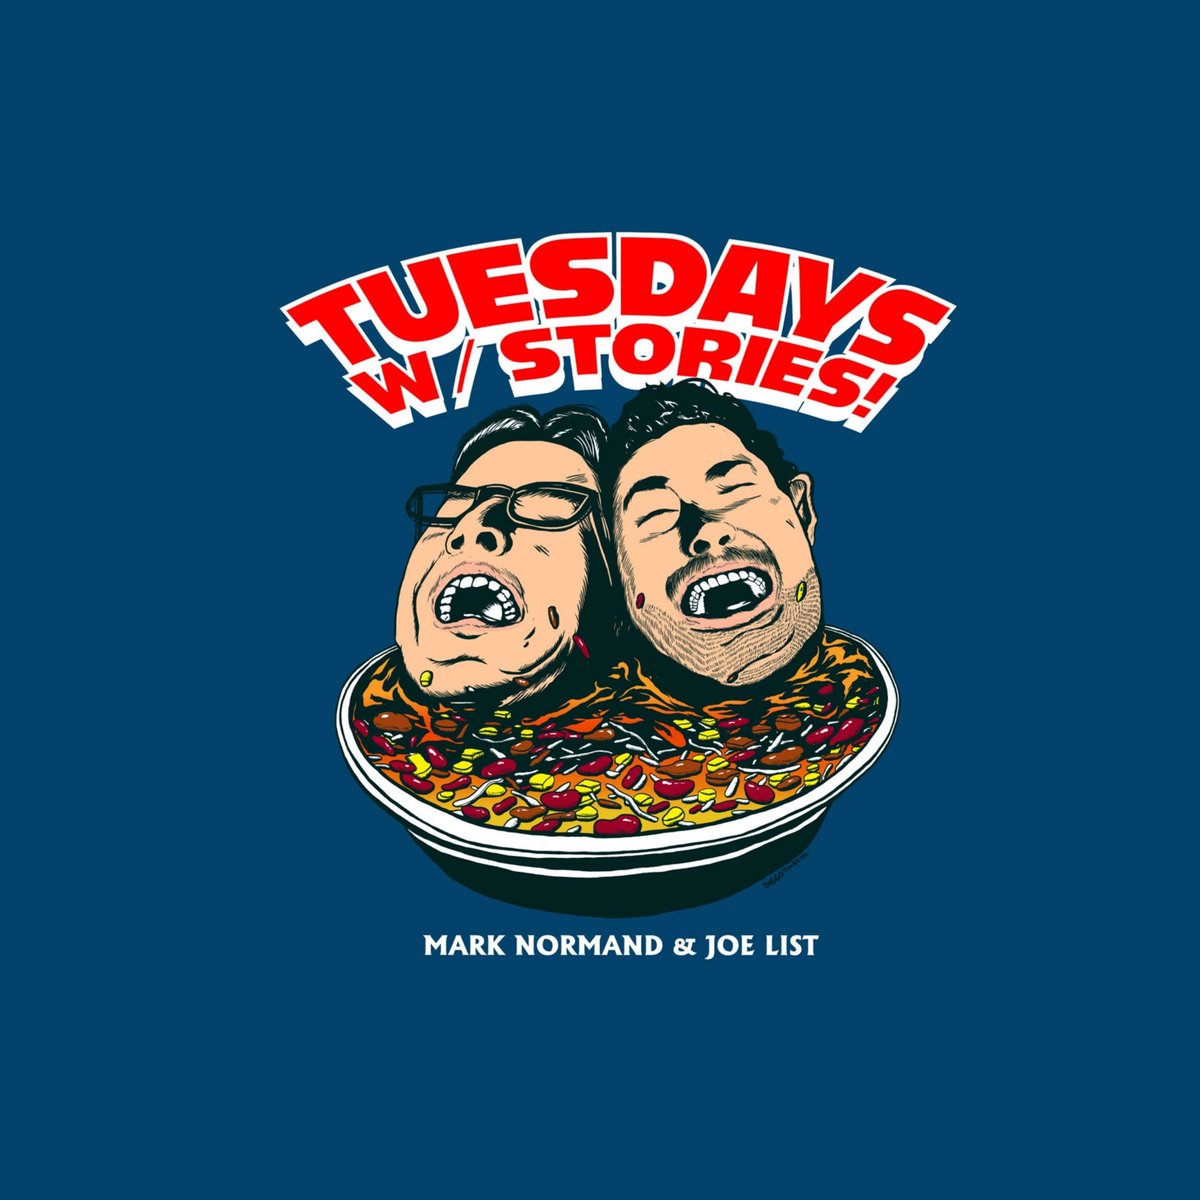 #Announced 🎤 @TuesdayStories - March 5th! Presale begins on Wednesday at 10AM (code: CREW), and tickets go on sale to the general public on Friday at 10AM > livemu.sc/3T82dLU